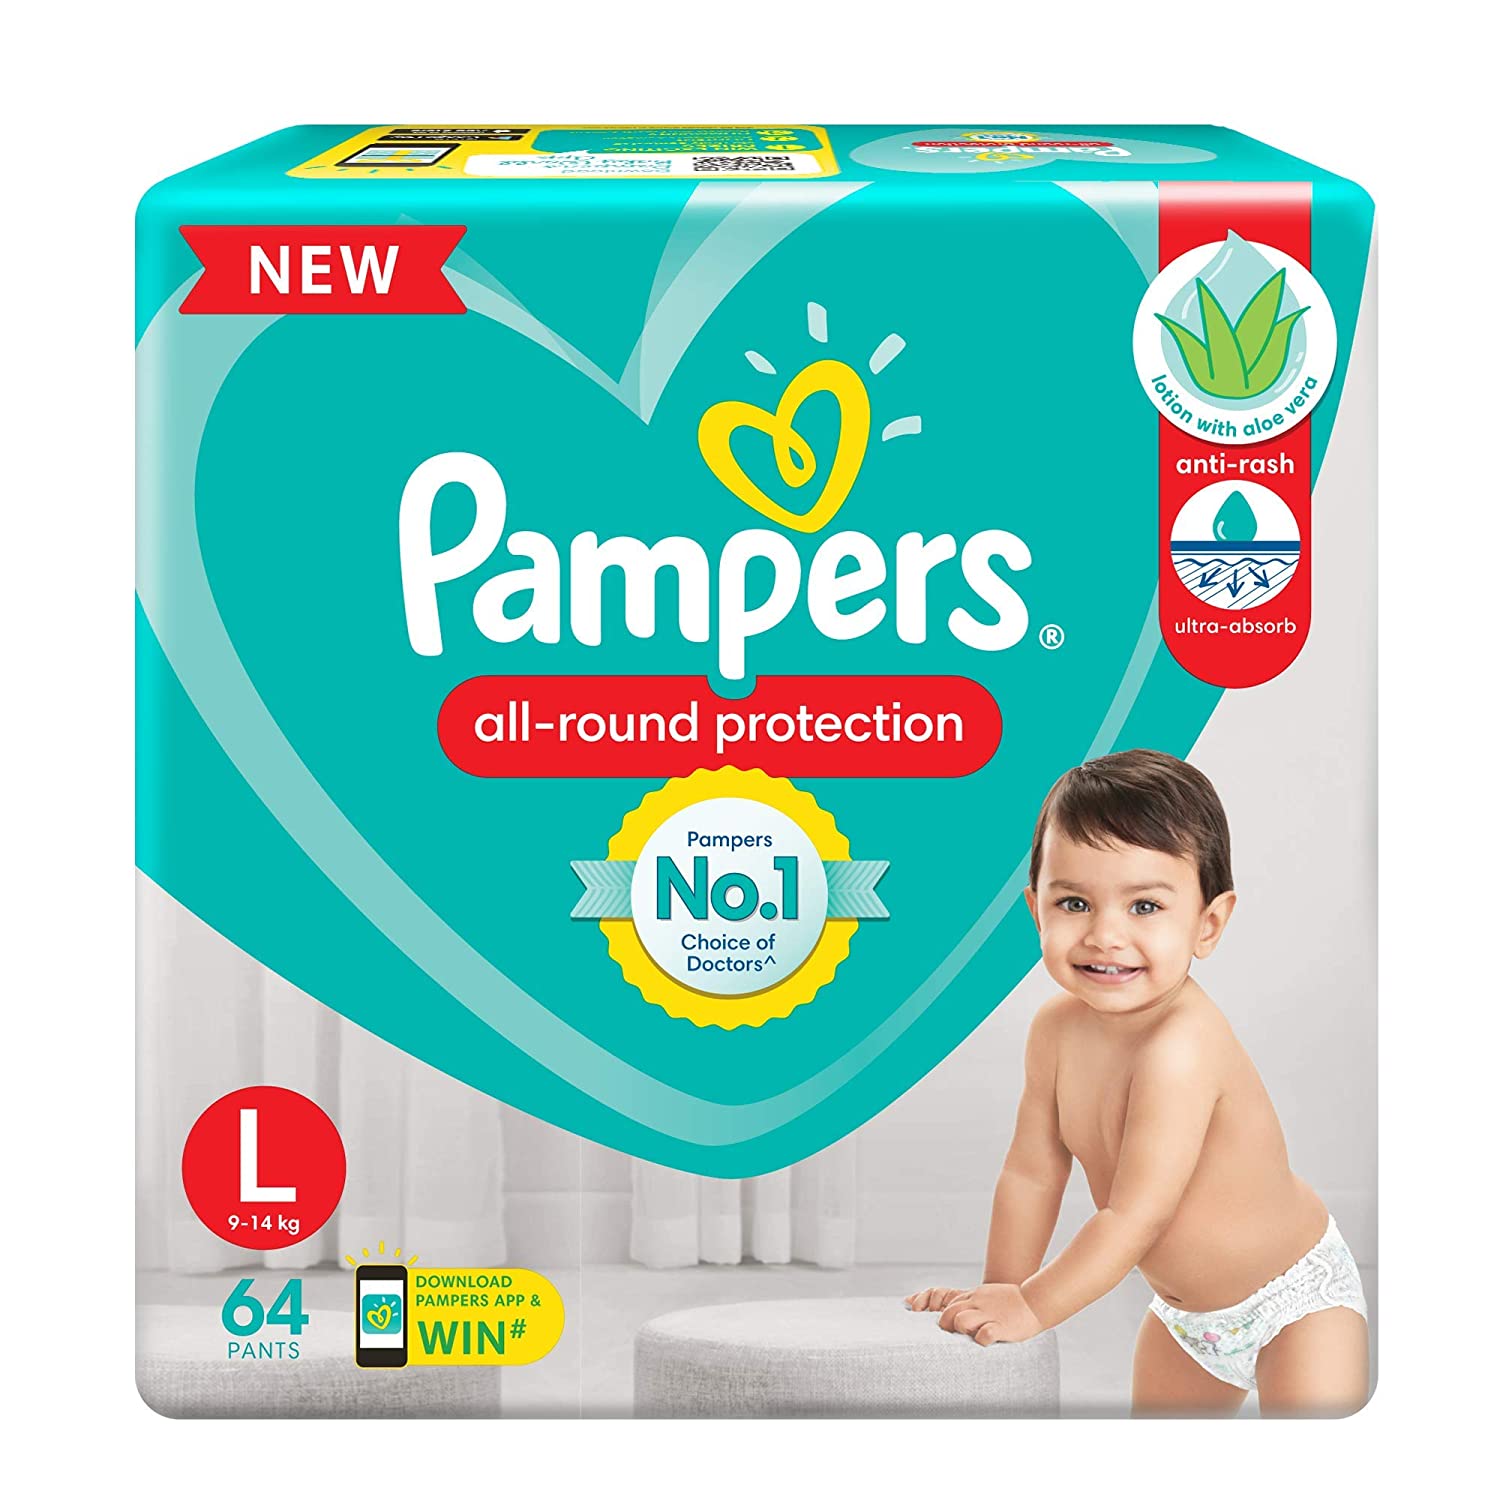 Pampers BabyDry Pants Diaper Large Buy packet of 5 diapers at best price  in India  1mg